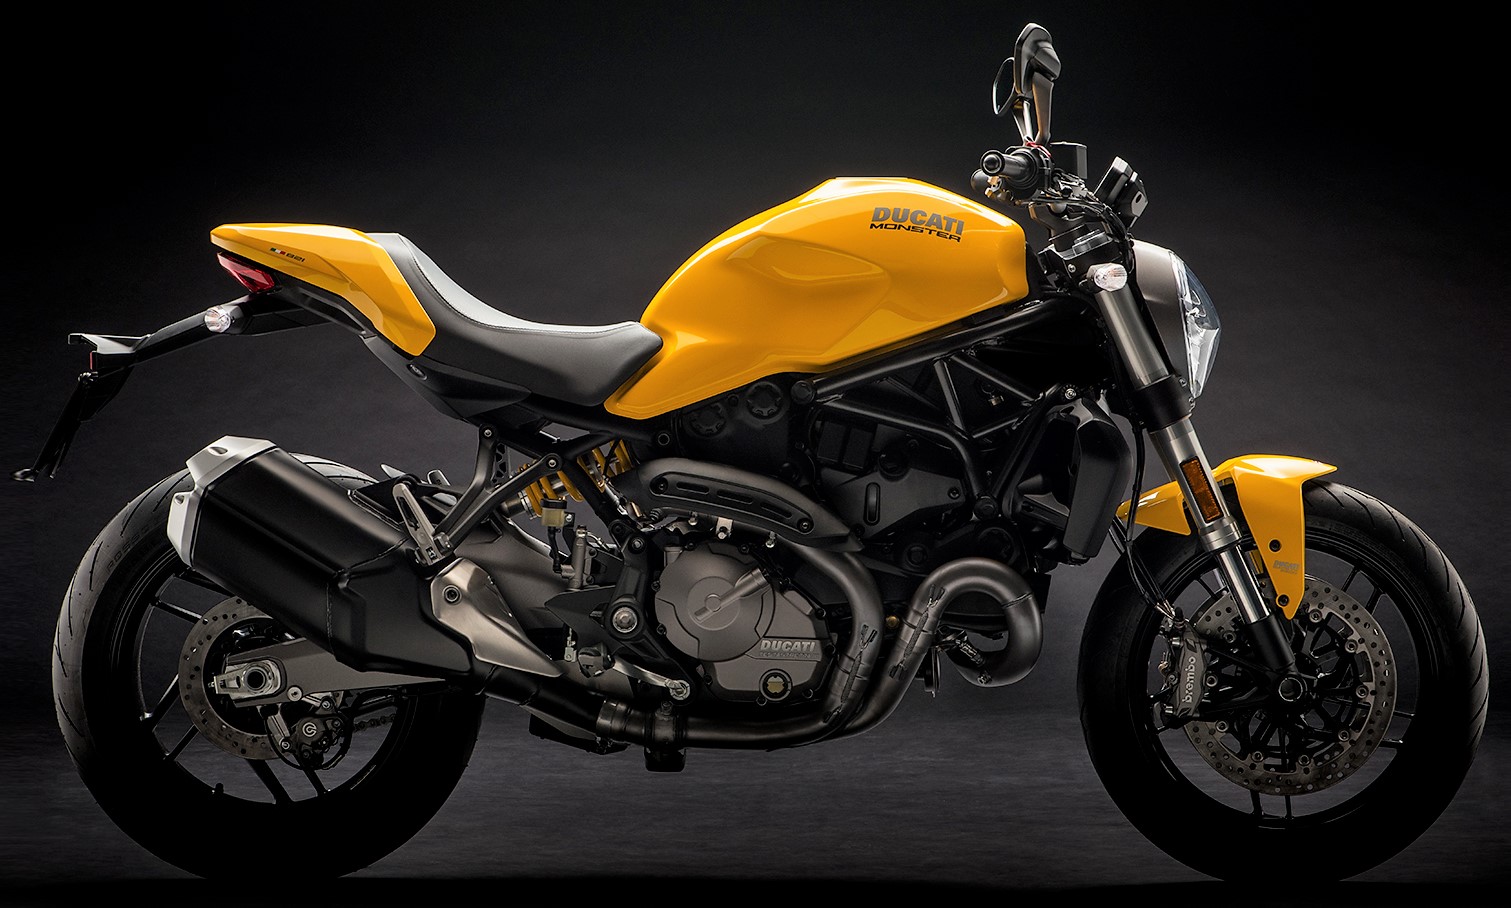 2018 Ducati Monster 821 to Launch in India on May 1, 2018